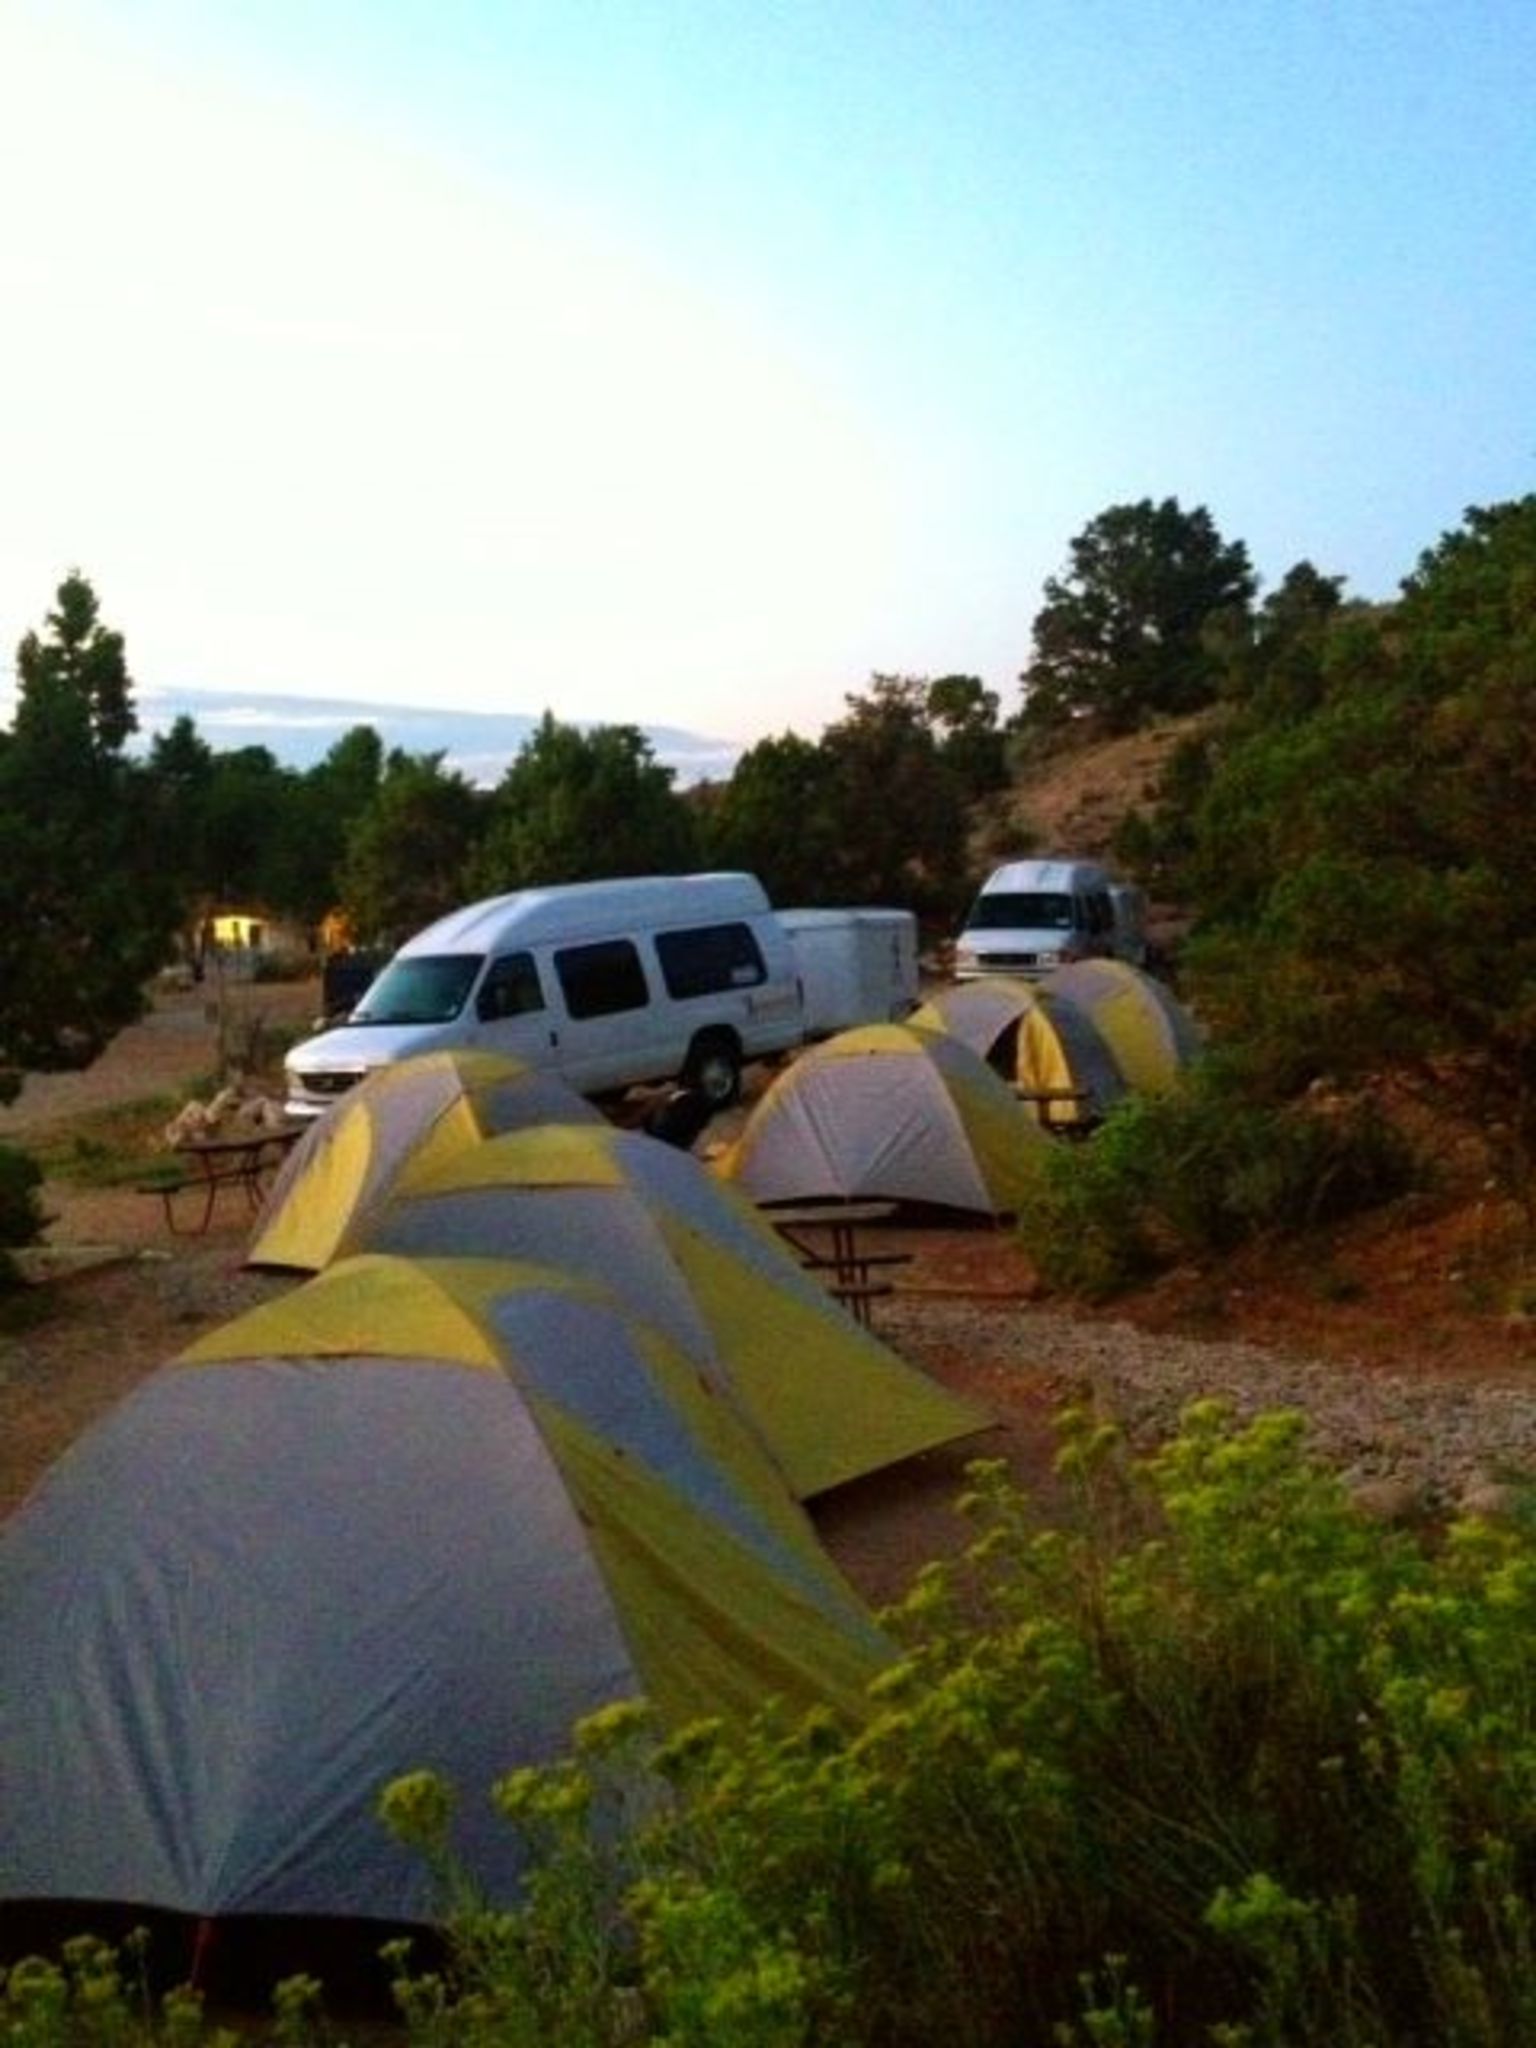 Camping in Bryce Canyon